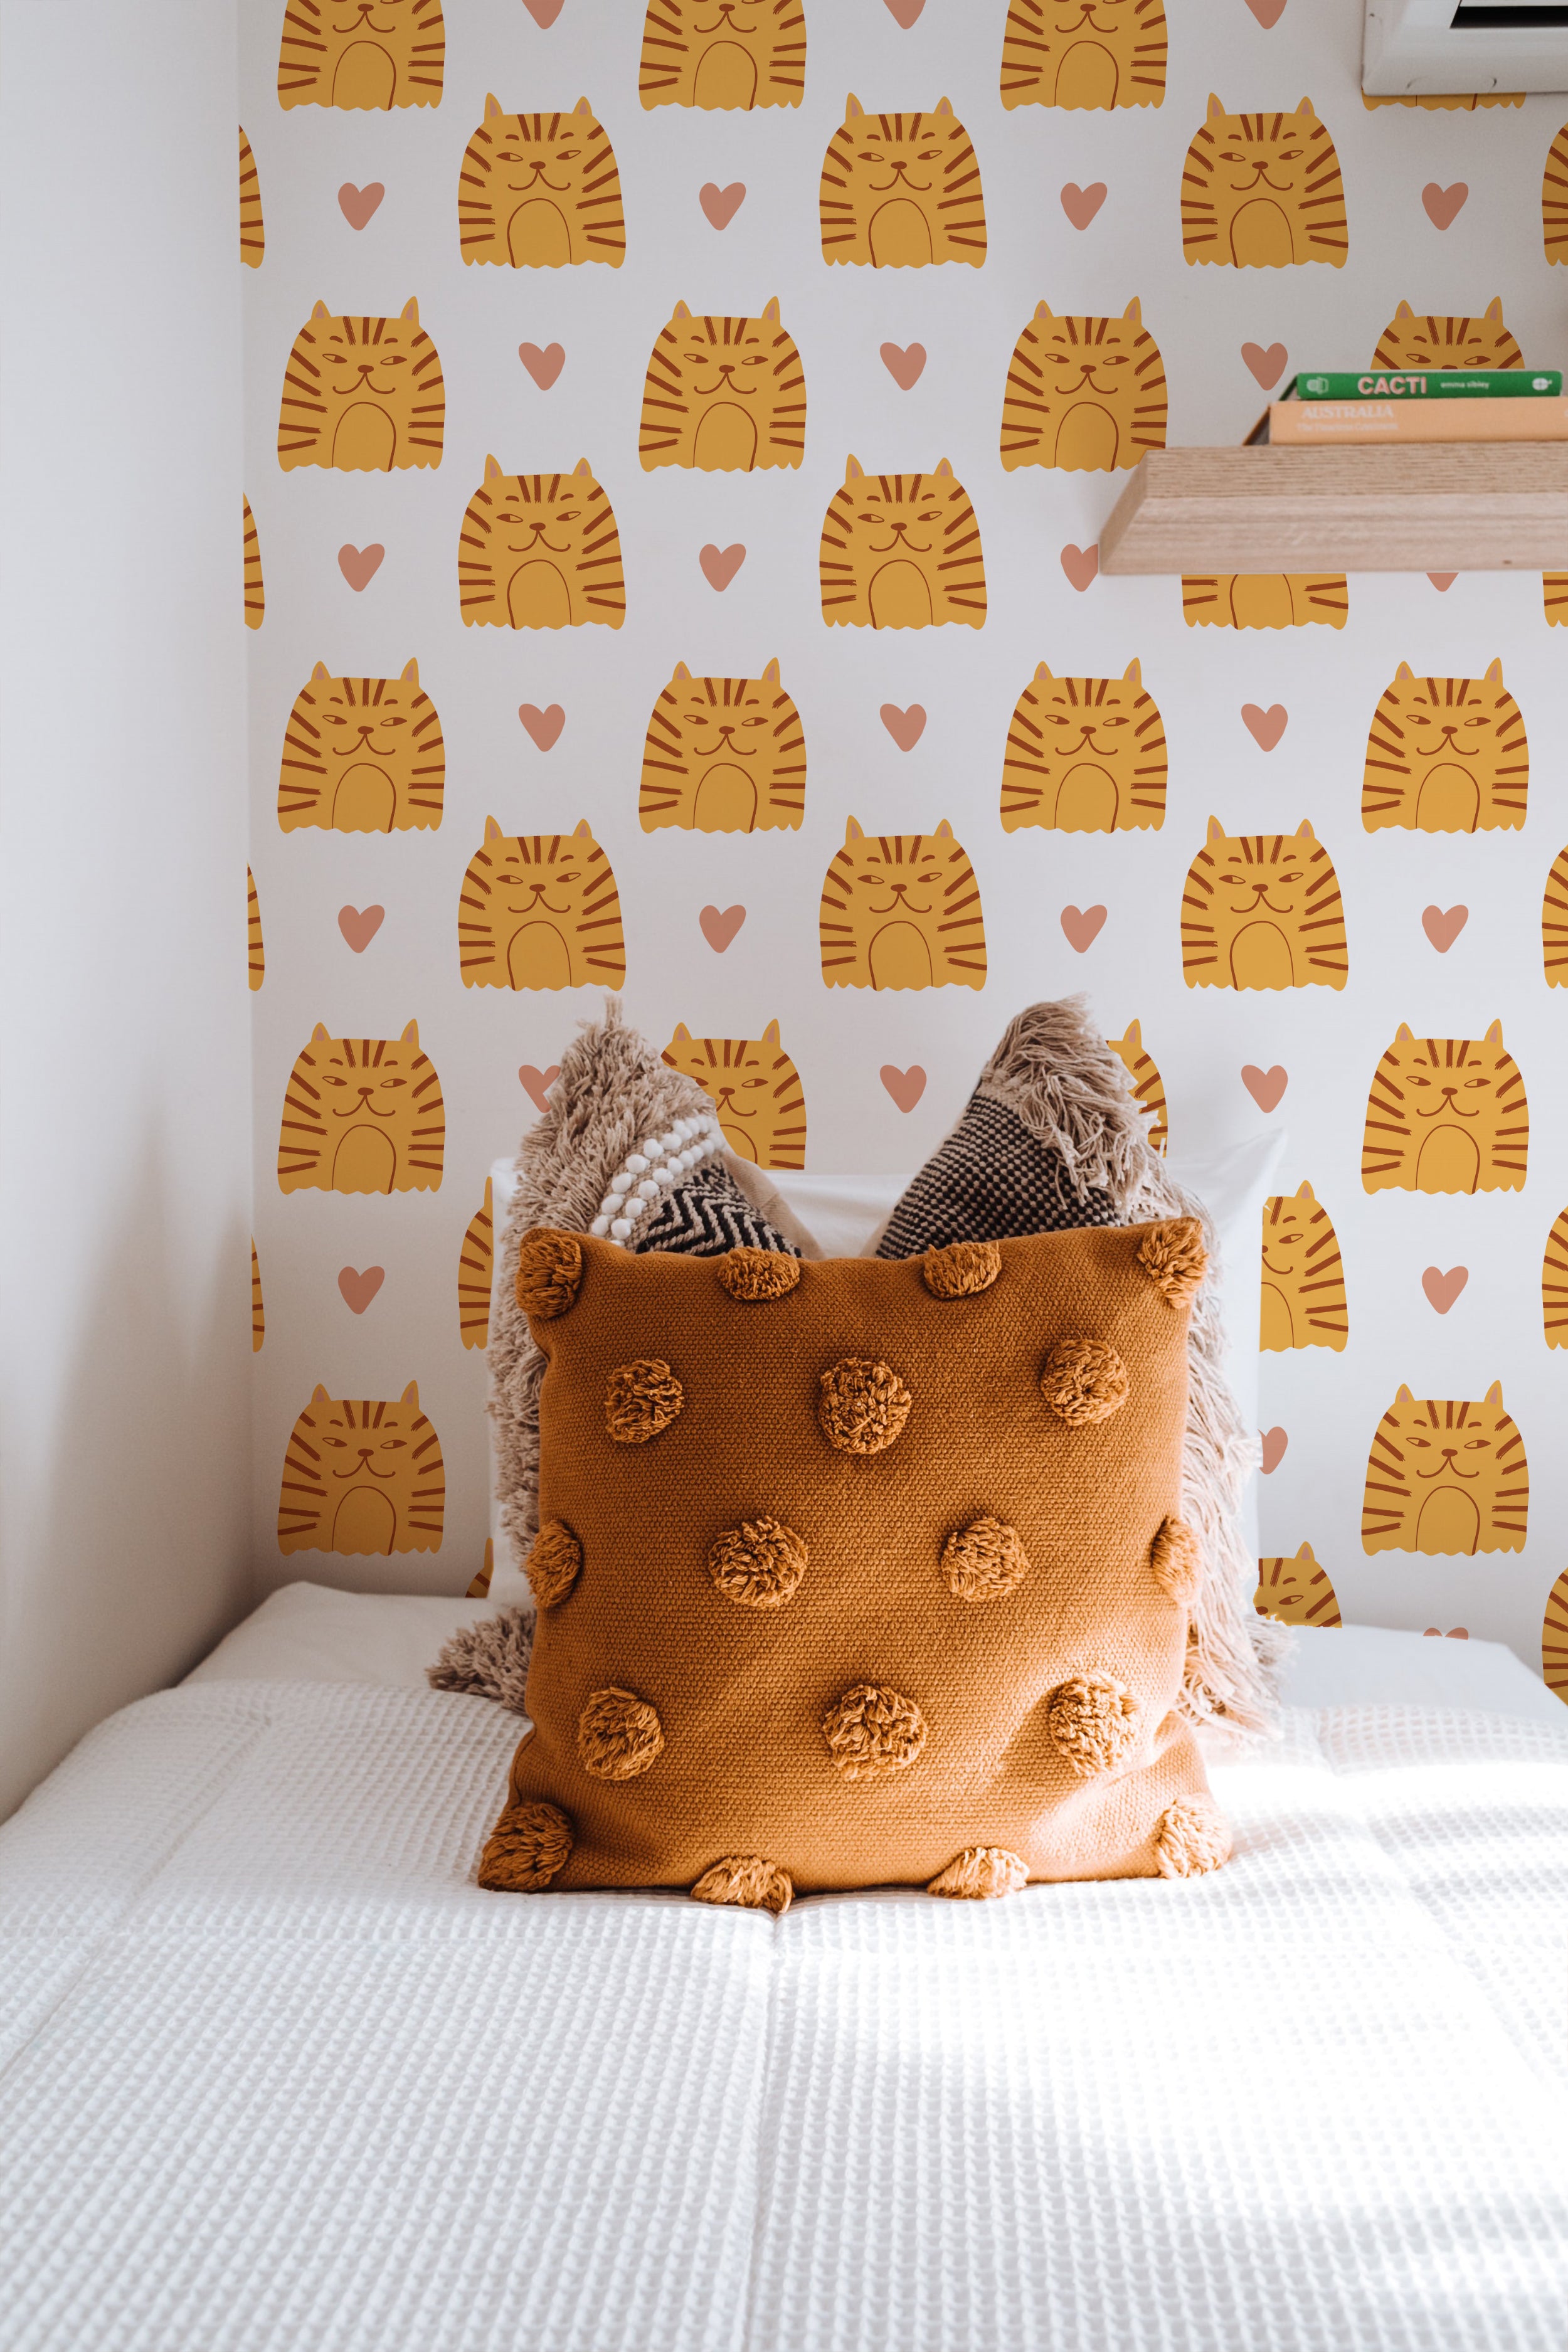 A cozy bedroom setting featuring the 'Cat Wallpaper 9' adorned with orange striped cats and pink hearts. The room includes a stylish mustard textured pillow and matching blankets, enhancing the warmth and inviting nature of the space